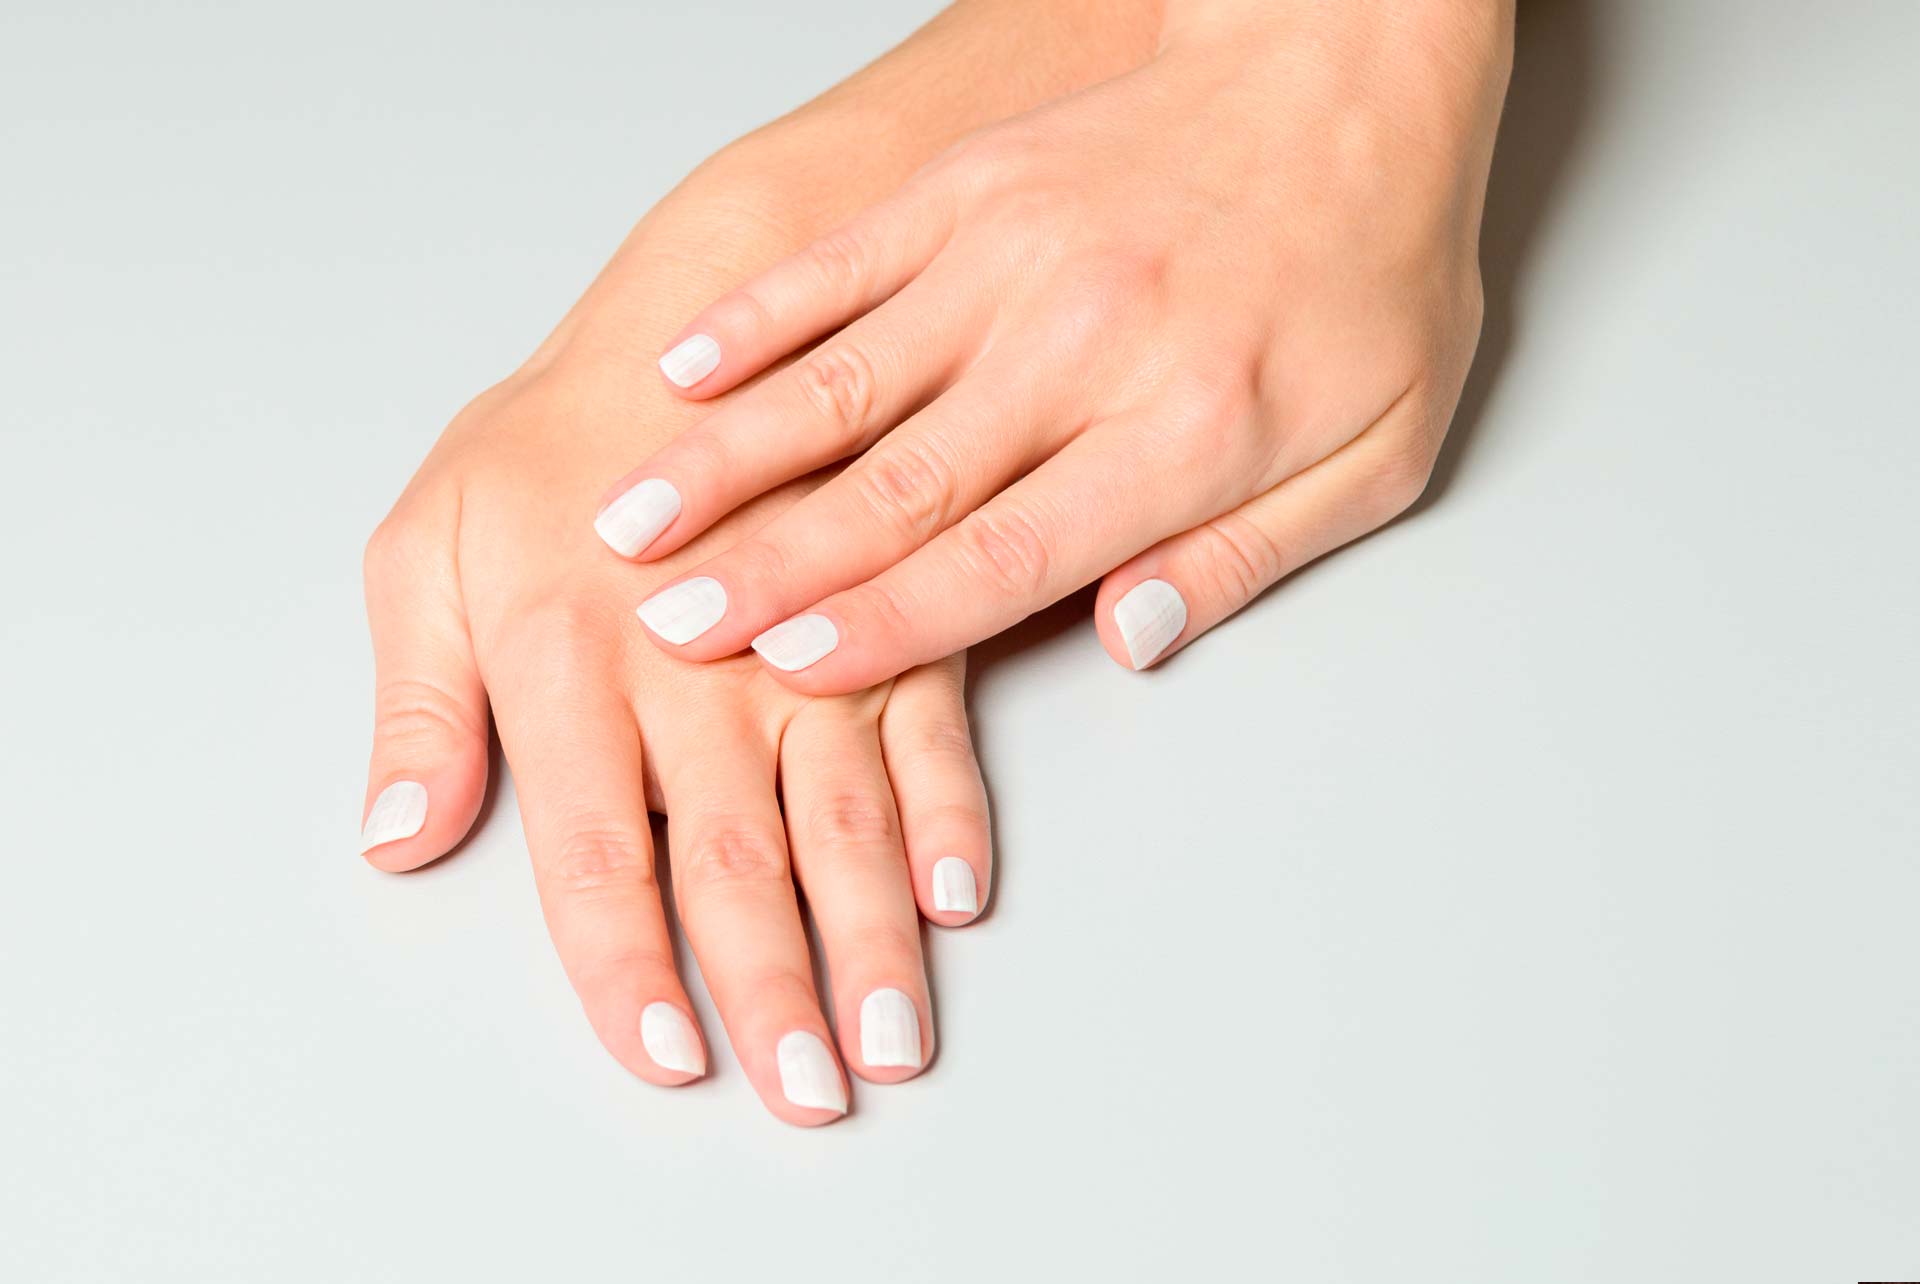 Hand Rejuvenation | The Cosmetic Skin Clinic